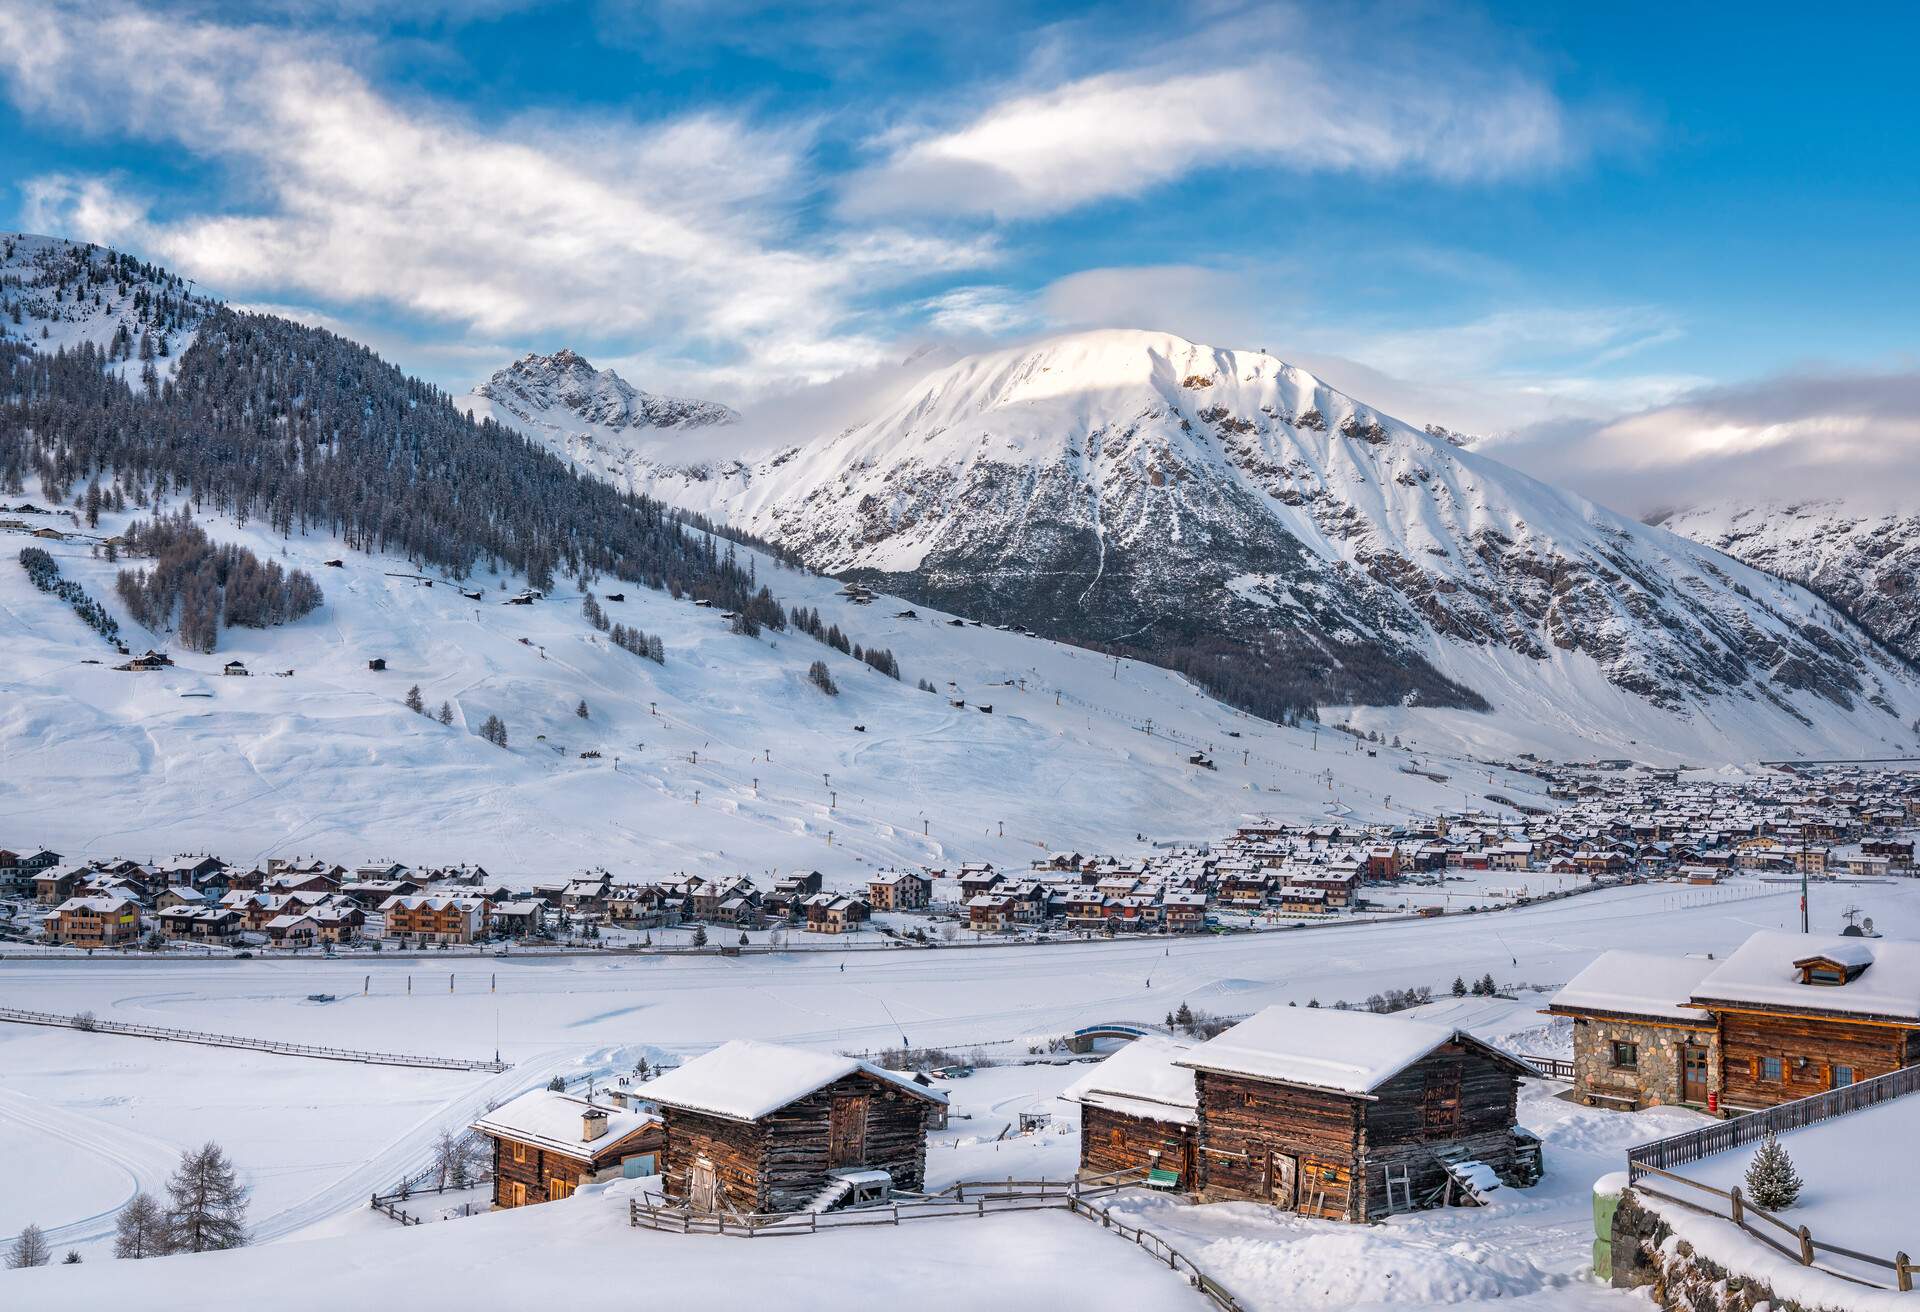 DEST_ITALY_ALPS_LIVIGNO_GettyImages-701222746